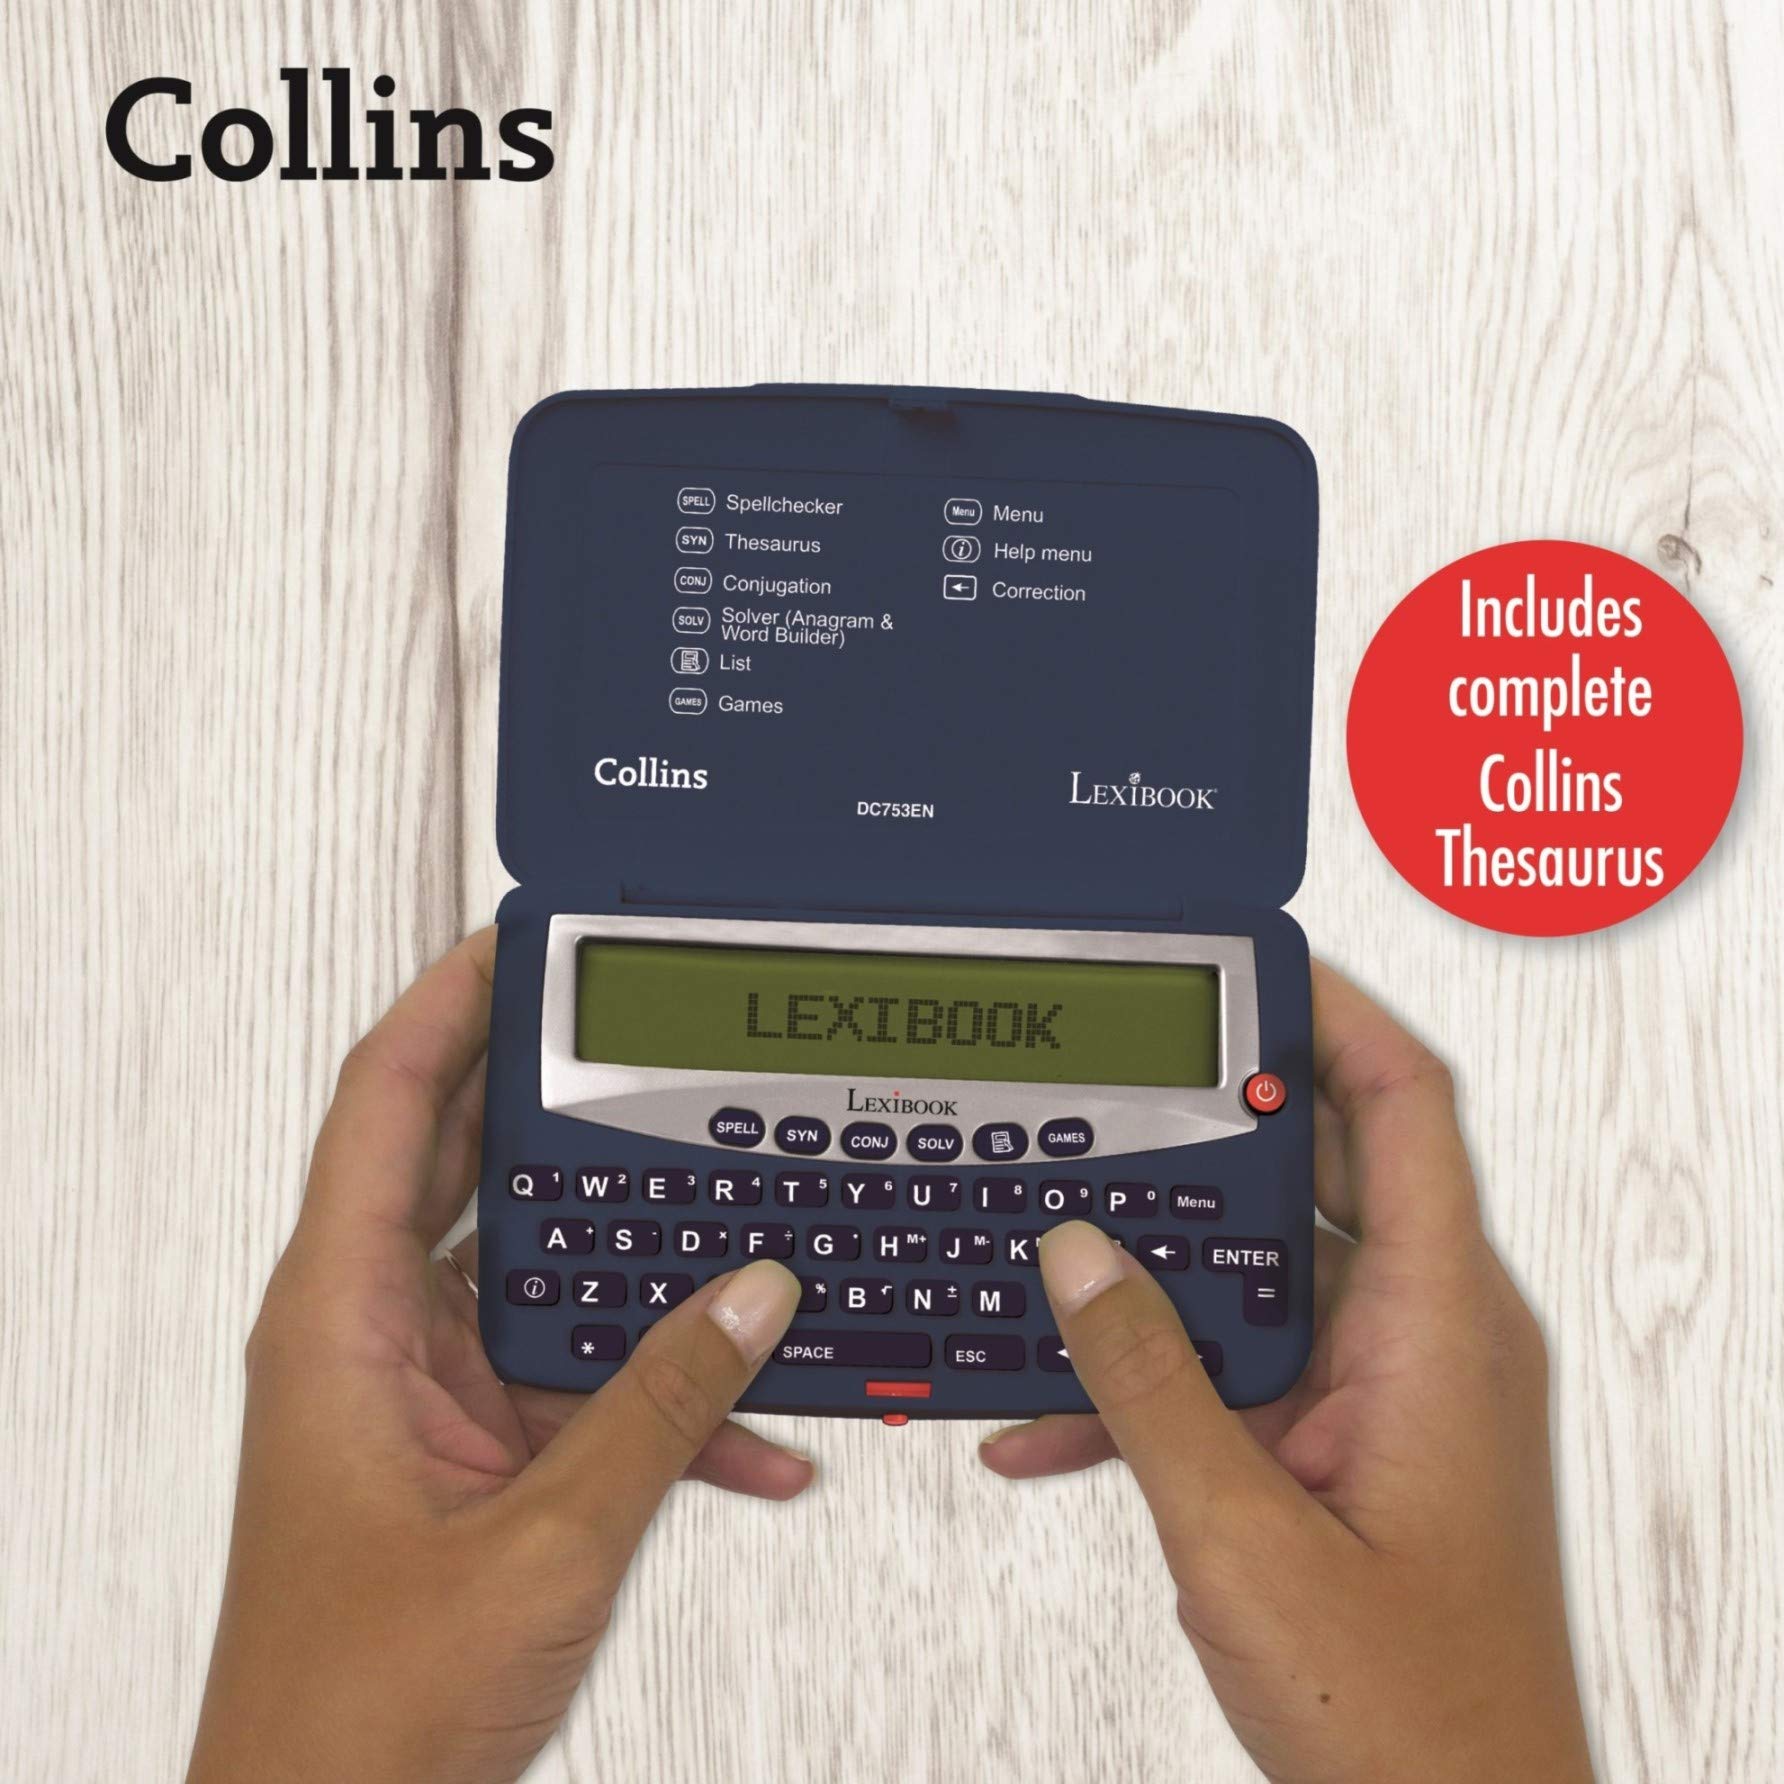 LEXiBOOK - Collins English Dictionary, 13th Edition - Electronic Pocket Spellchecker, Thesaurus, Crossword Solver, Conjugation, Anagram Solver, Words Games, with Battery, Blue/White, DC753EN